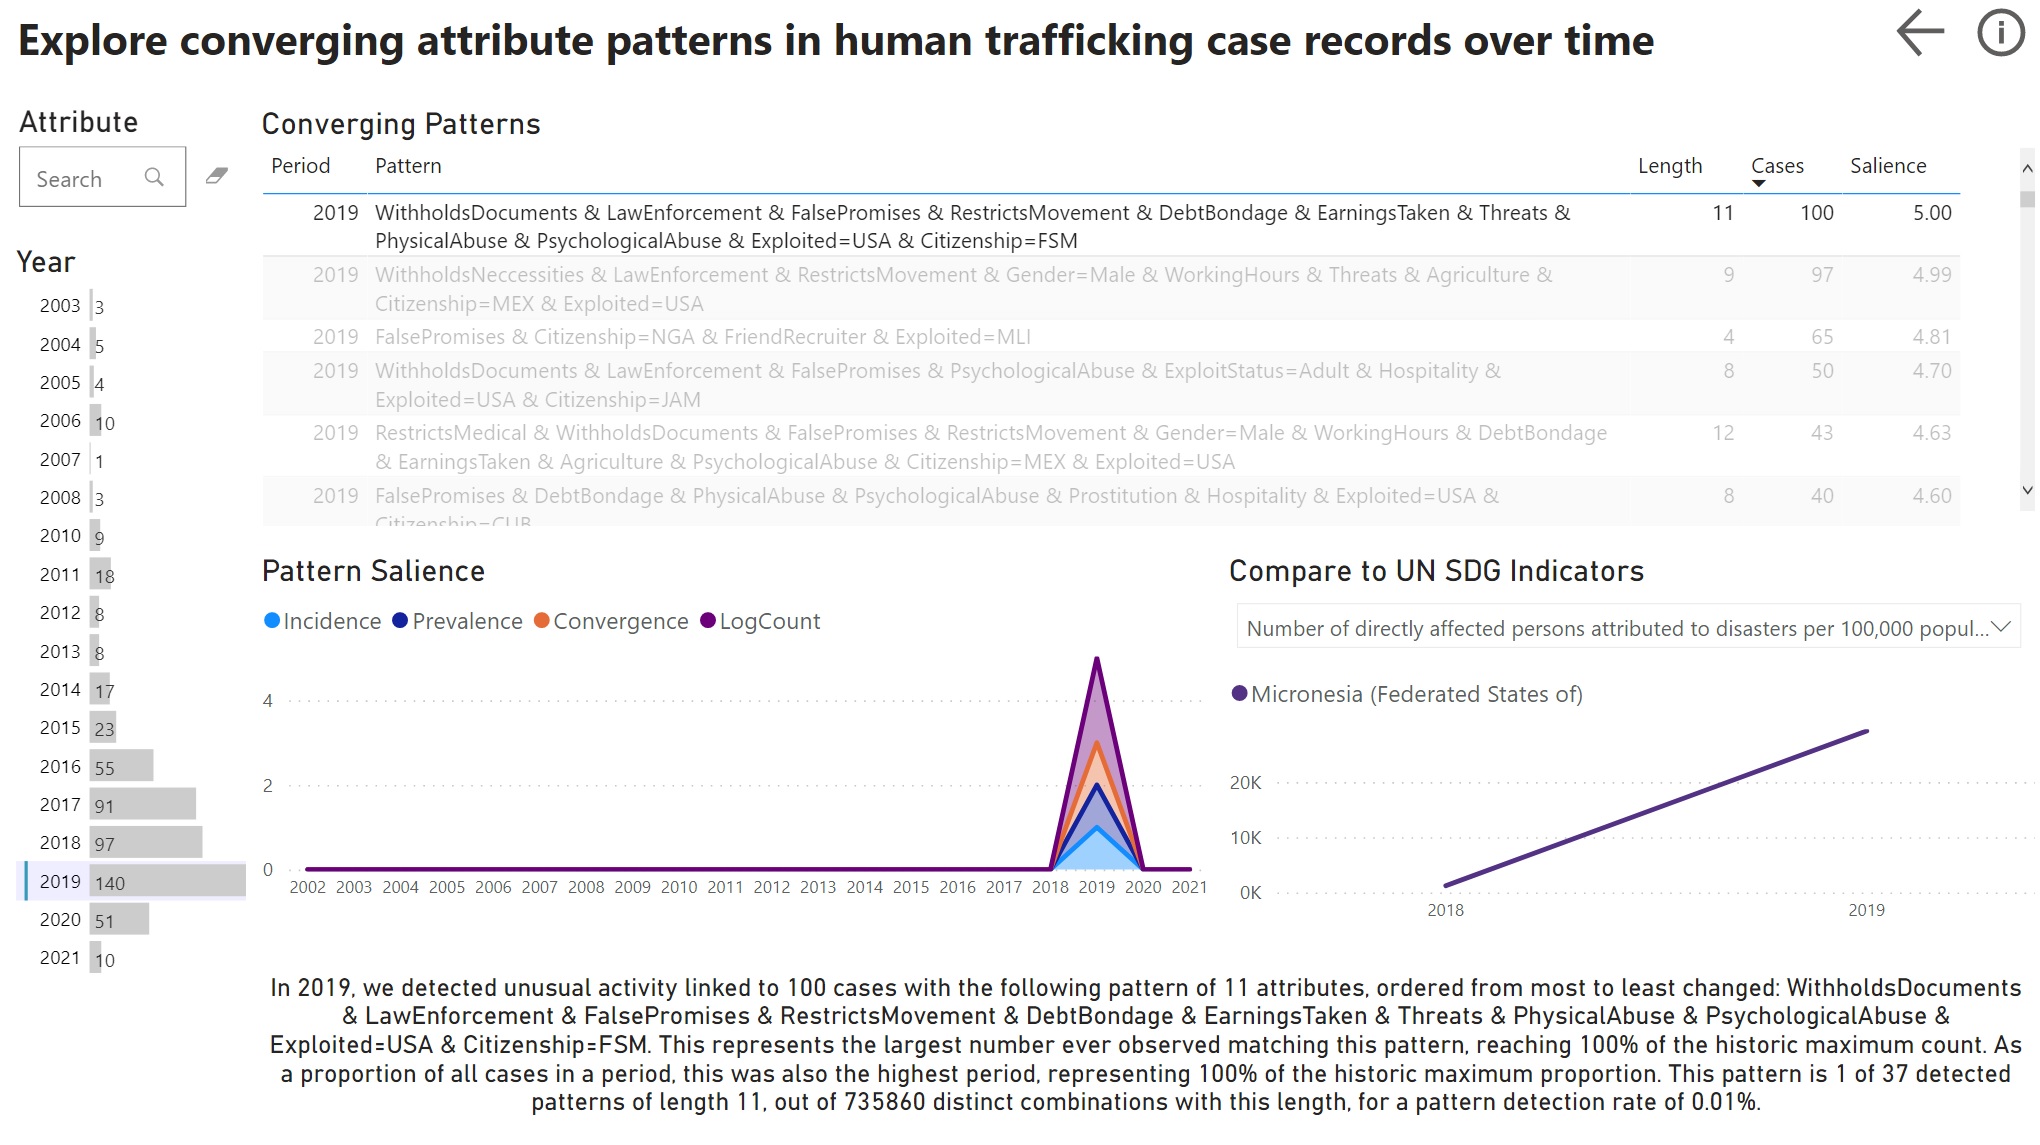 Interactive dashboard in Power BI titled “Explore converging attribute patterns in human trafficking case records over time”. To the left, a histogram of pattern count by year, with a maximum of 140 patterns in 2019. The year 2019 is also selected, showing a table of the 140 patterns linked to 2019. The patterns are ranked by a salience score, with the top pattern having a salience score of 5, a length of 11 attributes, and a link to 100 cases. This pattern is selected and contains a range of control methods for citizens of Micronesia exploited in the US. Below the table, there is a time series titled “Pattern salience” that shows a sole spike in 2019. To the right of this time series is another time series drawn from data on UN SDG indicators, showing a rise in the number of persons directly affected by disaster in Micronesia in 2019. Below these time series is an explanation of the pattern. This explanation notes that the pattern detected in 2019 corresponds to the historic maximum count of that attribute combination, and that it is one of 37 detected patterns of length 11, out of 735,860 distinct combinations with this length, representing a pattern detection rate of 0.01%.